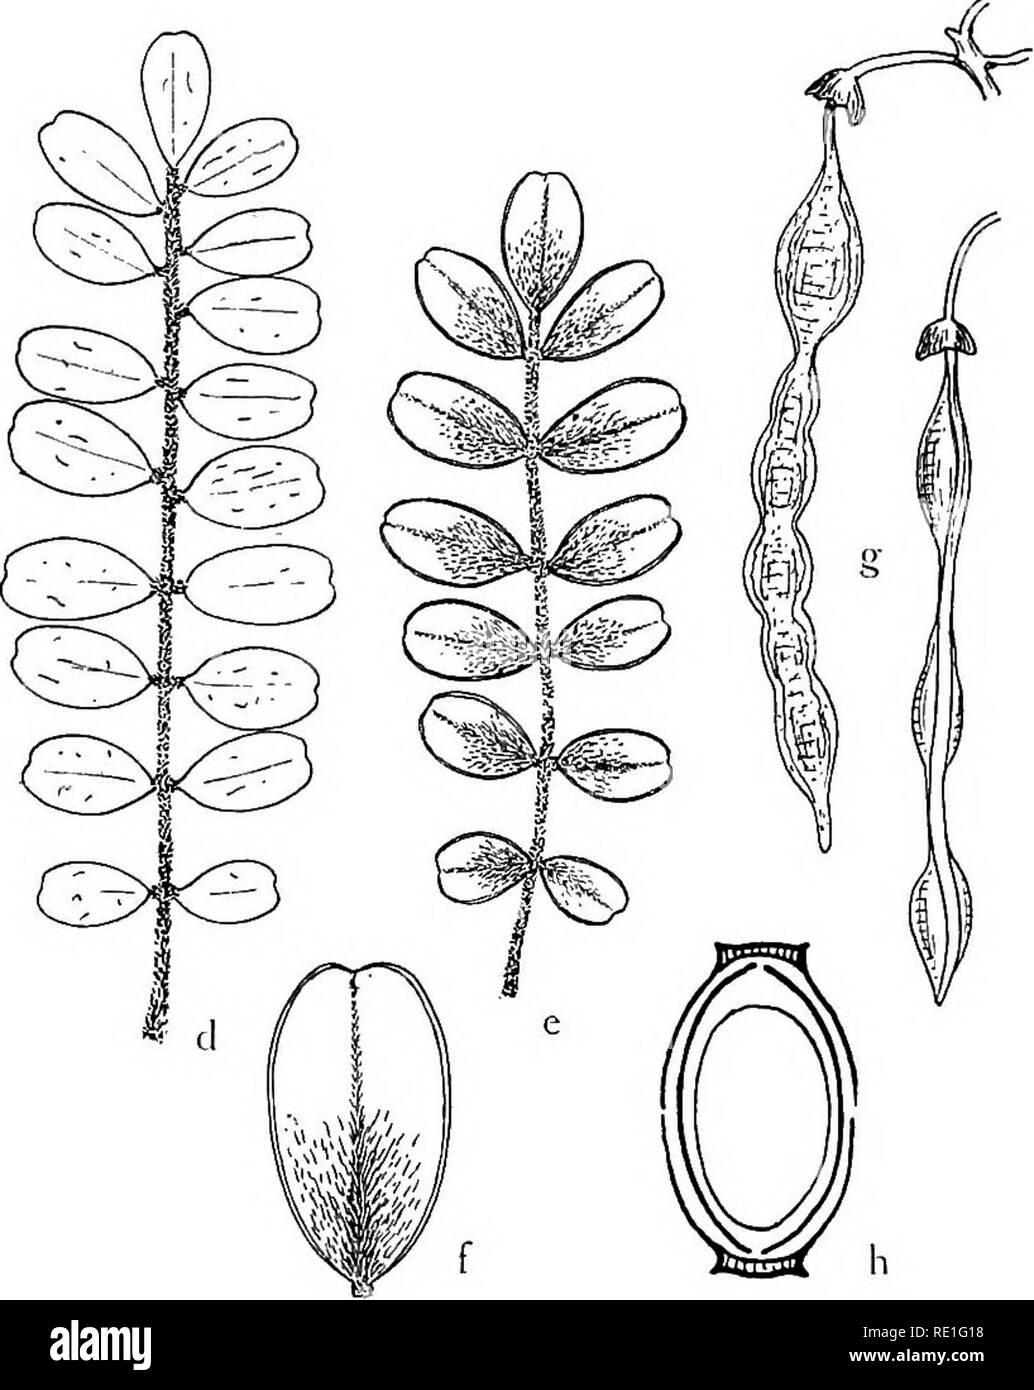 . The phanerogams of the Juan Fernandez Islands. Botany. Fig. 11. aâc Sophora fernandeziana: a leaf of no. 63, lower side, b of no. 214 (f. gracilior), nat. size; c mature pod of no. 599, Â£ nat. size, dâg .!&gt;'. masafuerana:â d upper, e lower side of leaf, nat. size, f lower side of leaflet, X 2; g mature pods,| nat. size, h dehiscence of Sophora pod, schematic cross section. We cannot, I think, simply use the name 5. tetraptera for the Chilean plant. Philippi called it Edw. macnabiana Grah. Edinb. New Phil. Journ. 26 (1839) 196 (figured in Bot. Magaz. 66, pi. 3735). Graham's description wa Stock Photo